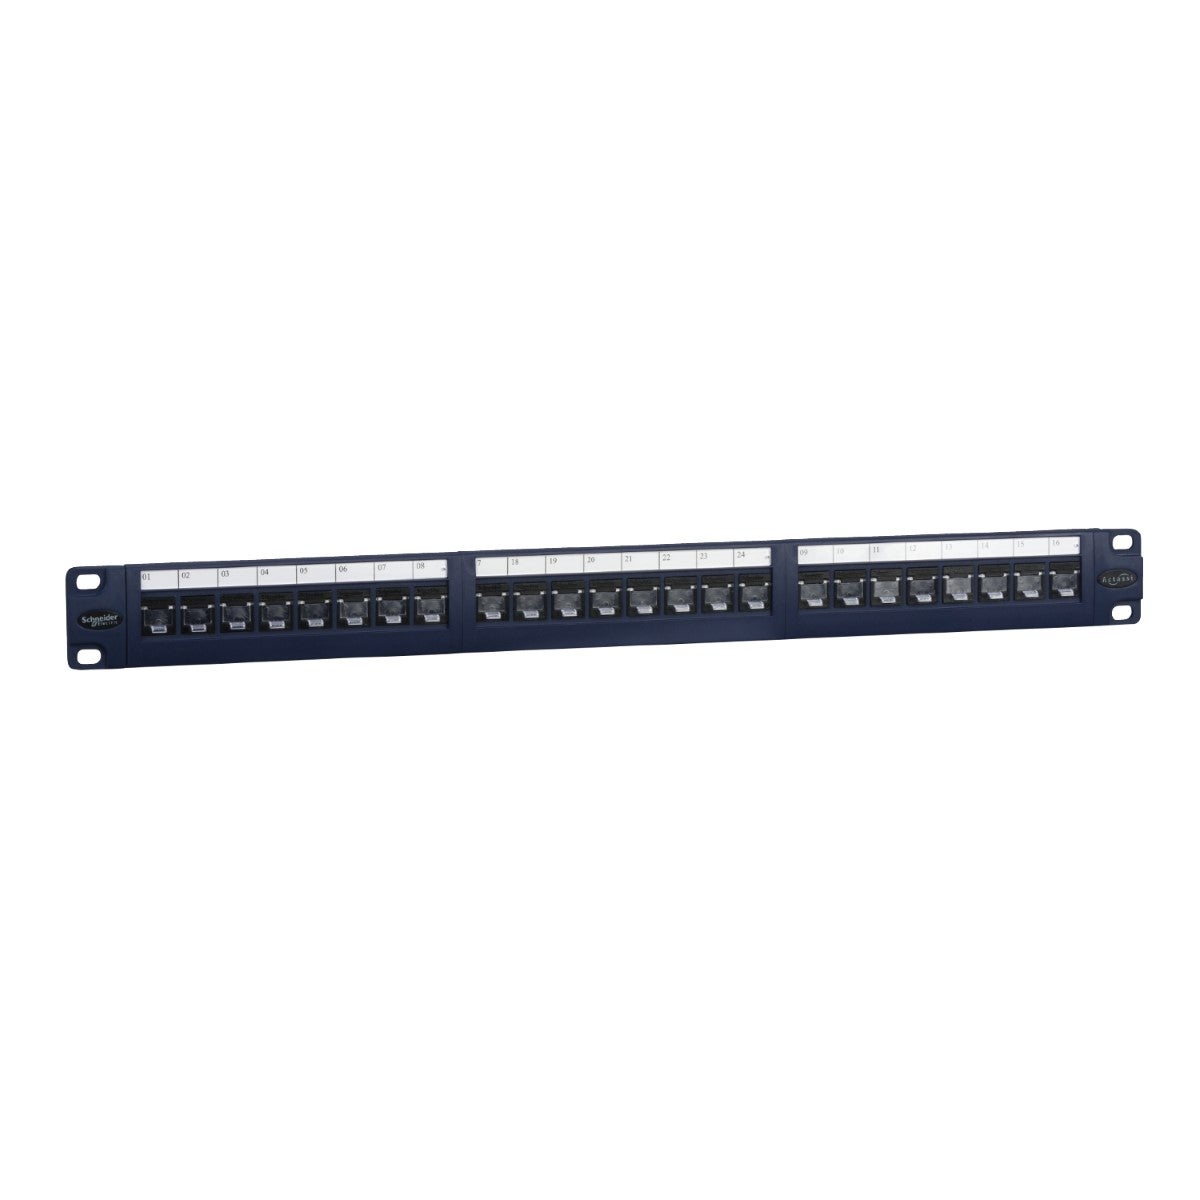 Actassi - patch panel - category 6 - UTP - 24 Port - 1U - straight loaded